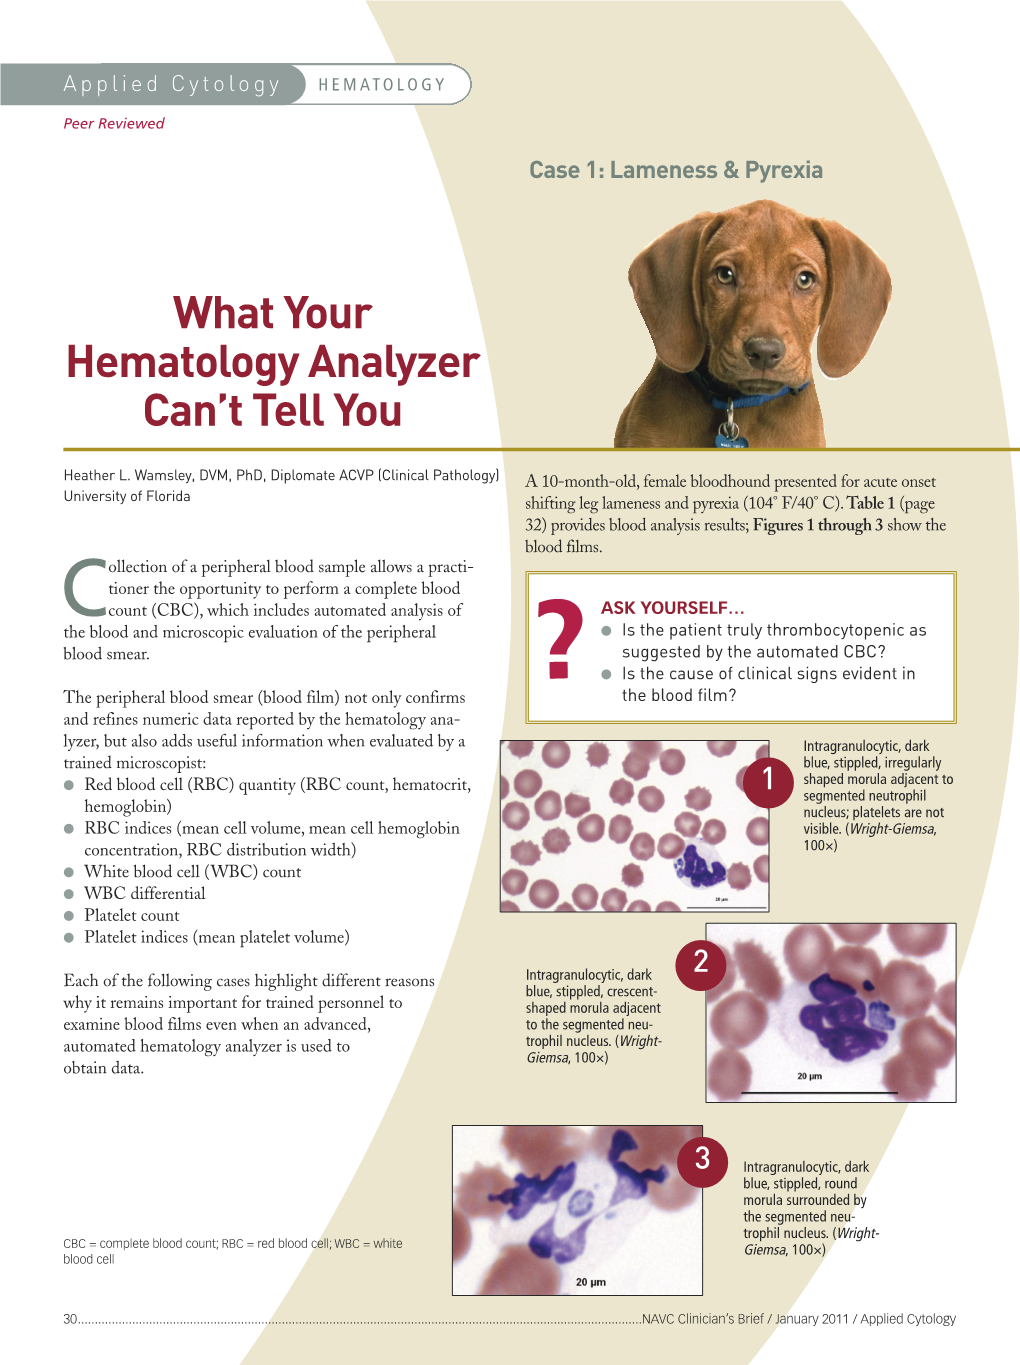 What Your Hematology Analyzer Can't Tell